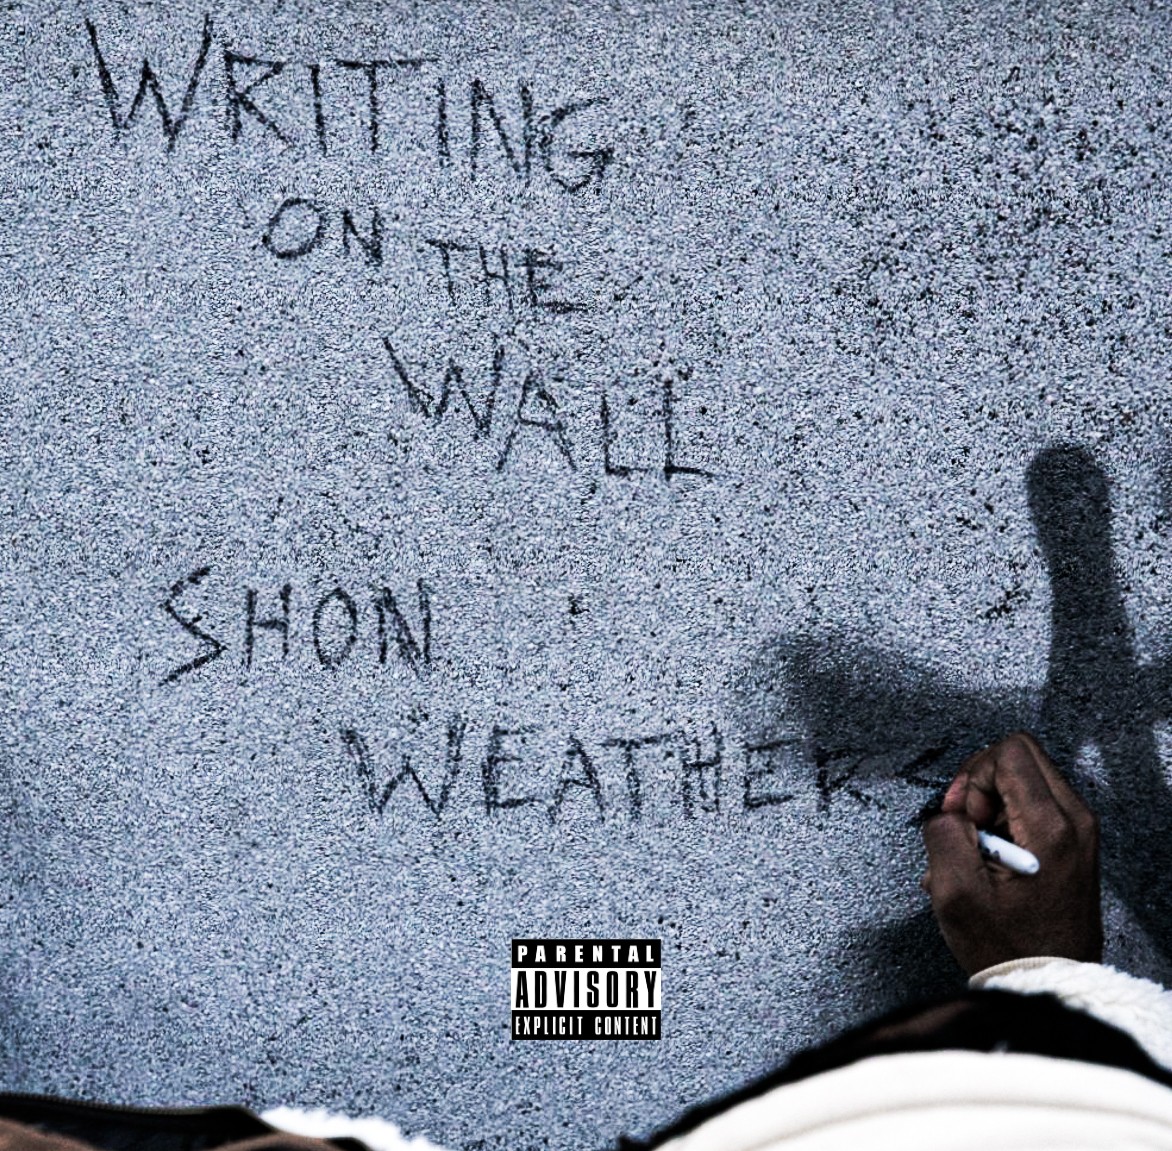 Shon Weathers – “Writing on the Wall”